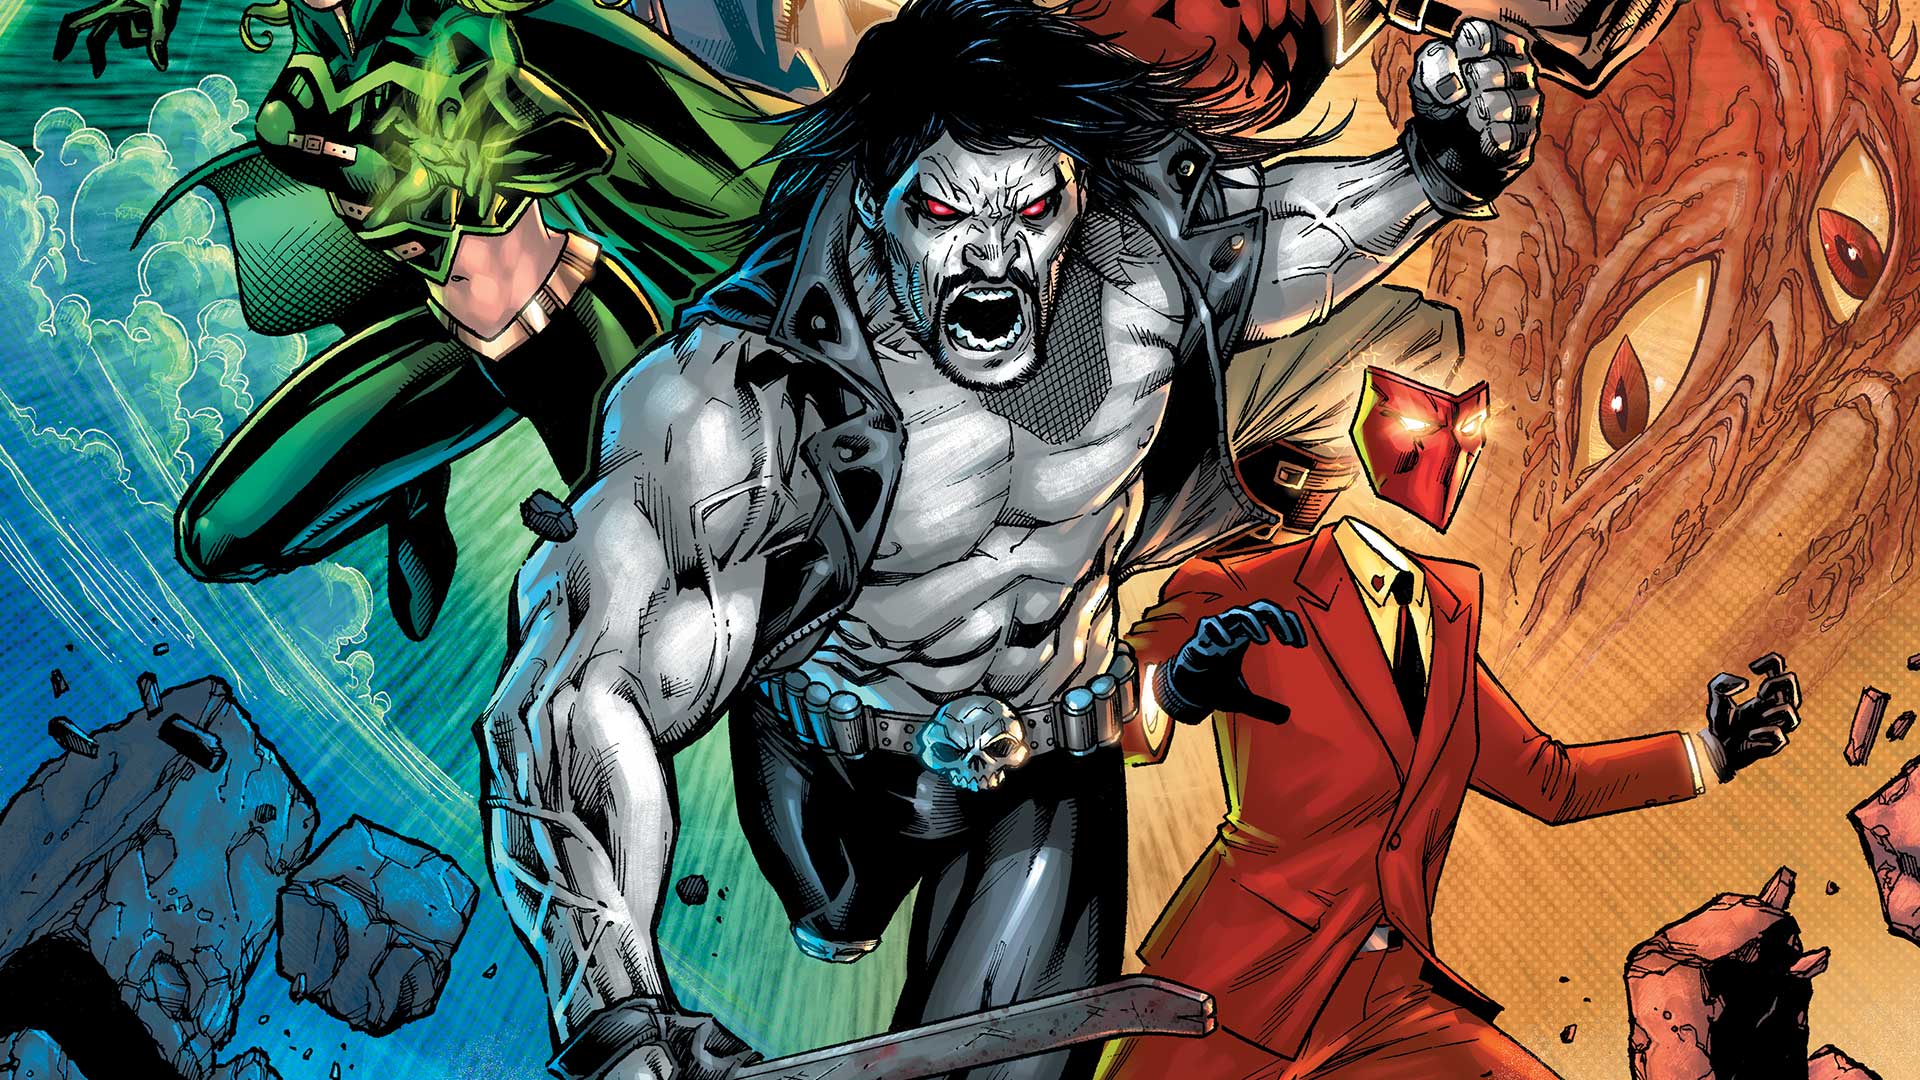 This Just Happened: The Justice League is Put on Ice